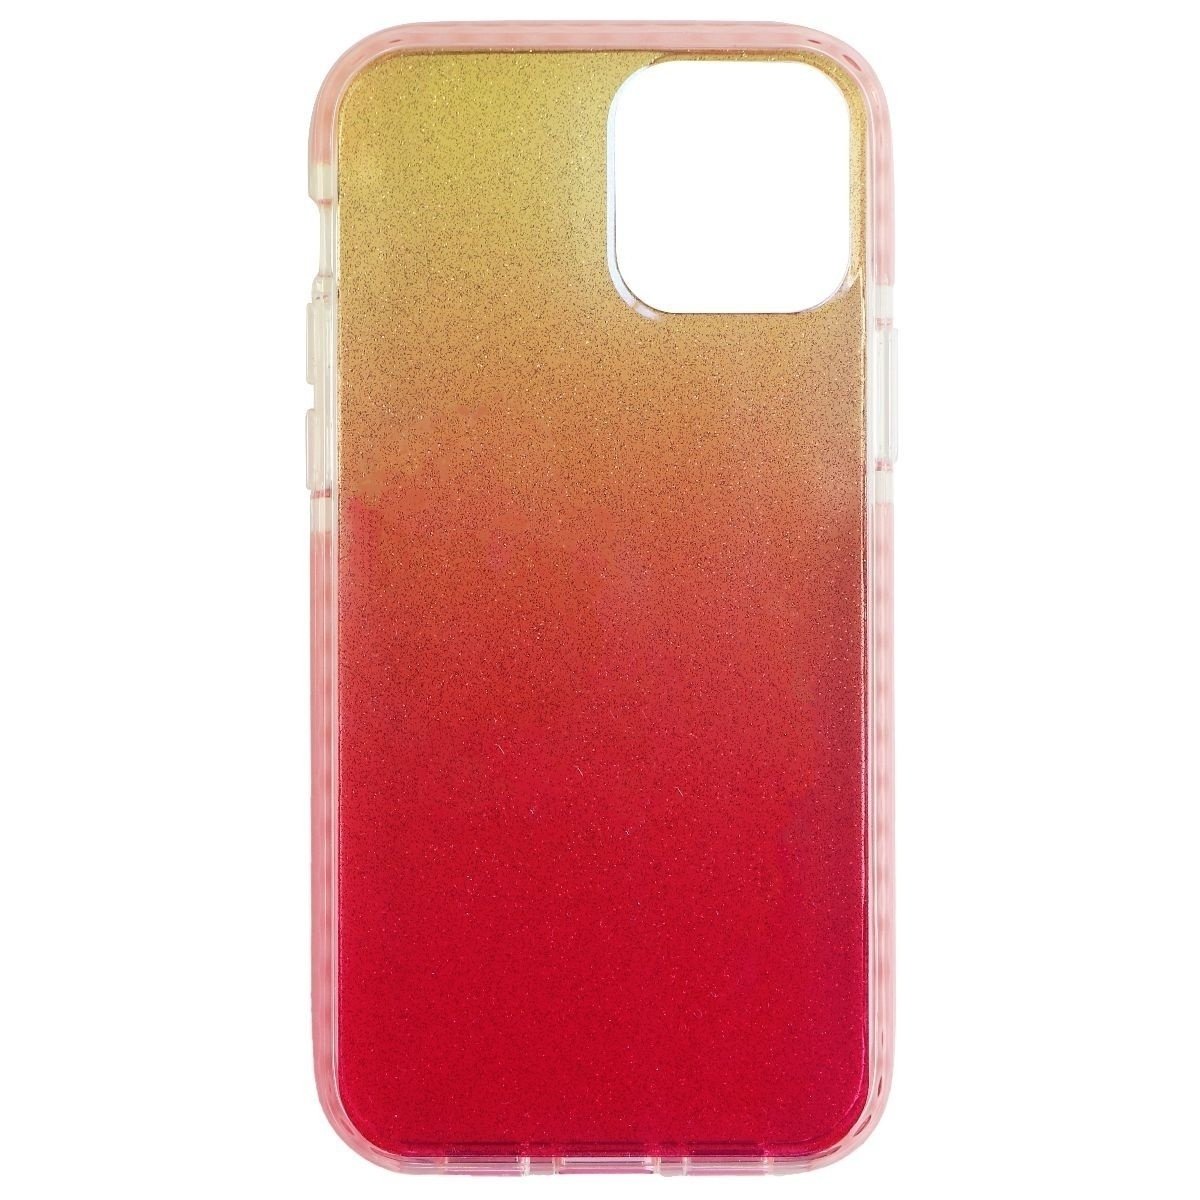 AQA Slim Case For Apple IPhone 12 And IPhone 12 Pro - Yellow/Red Glitter